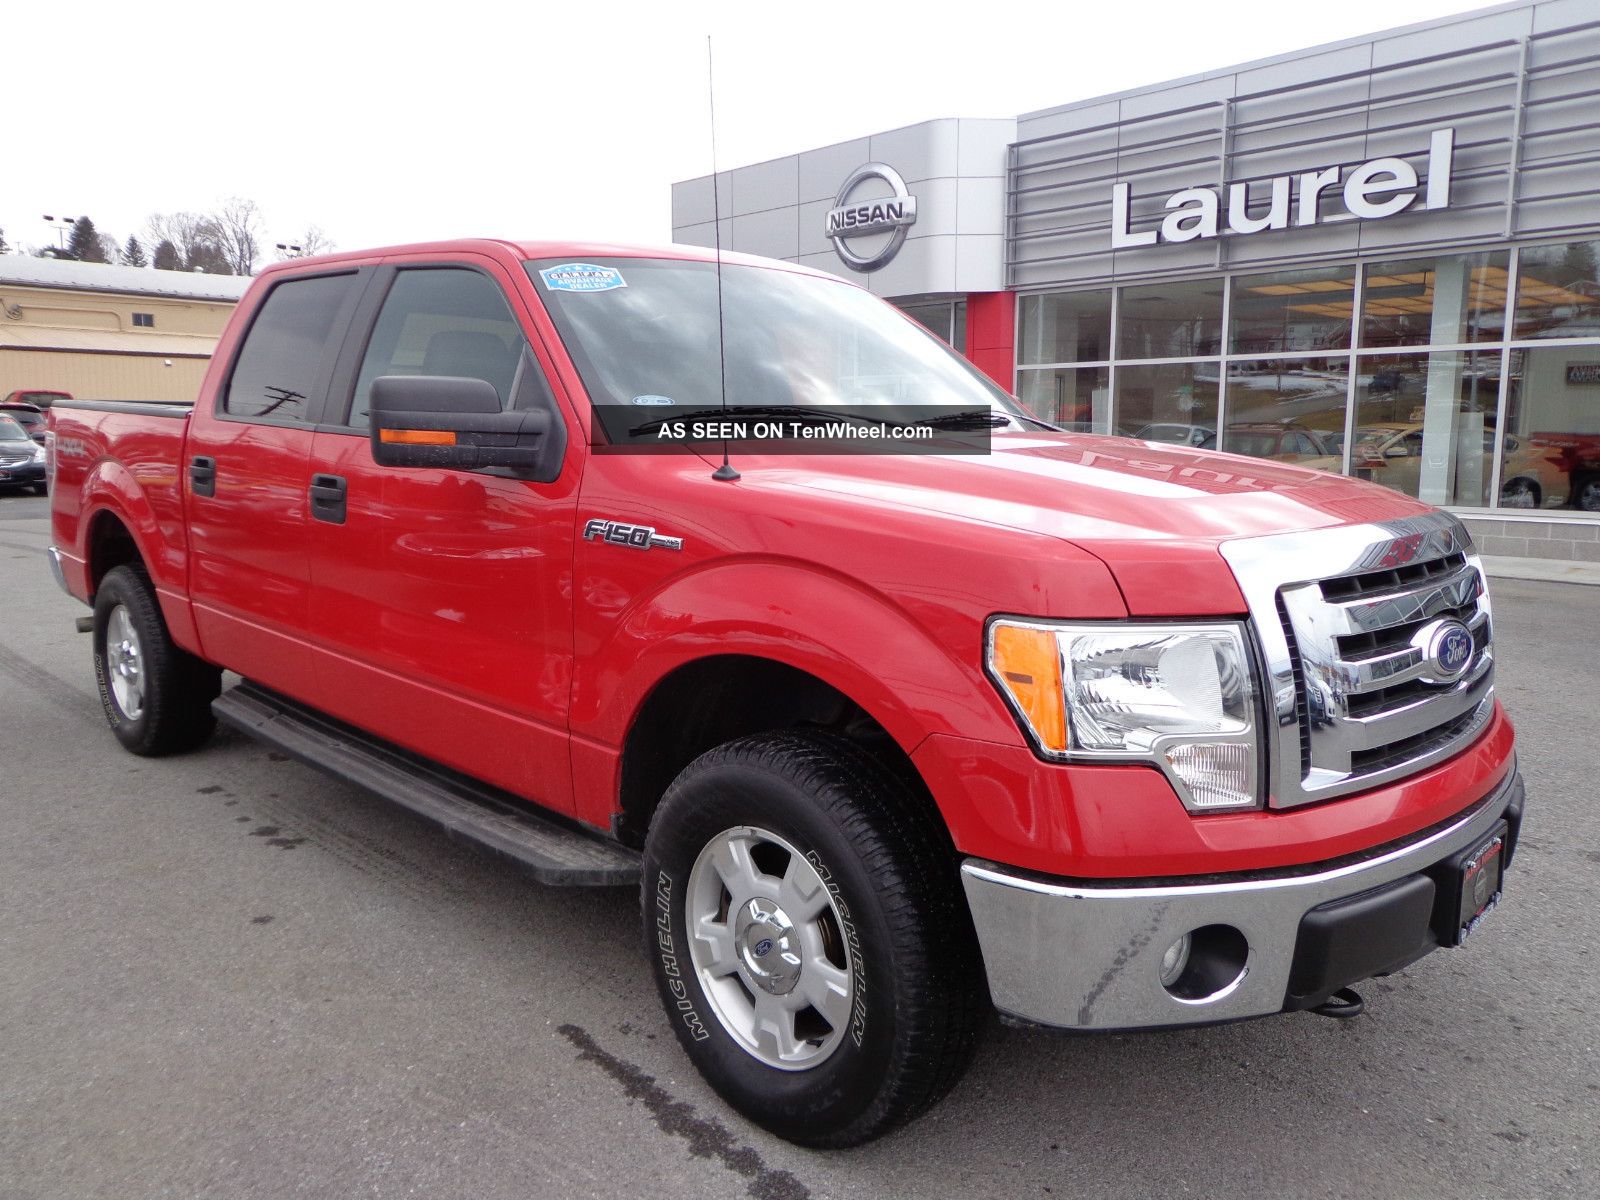 2010 Ford F150 5.4 L V8 Towing Capacity